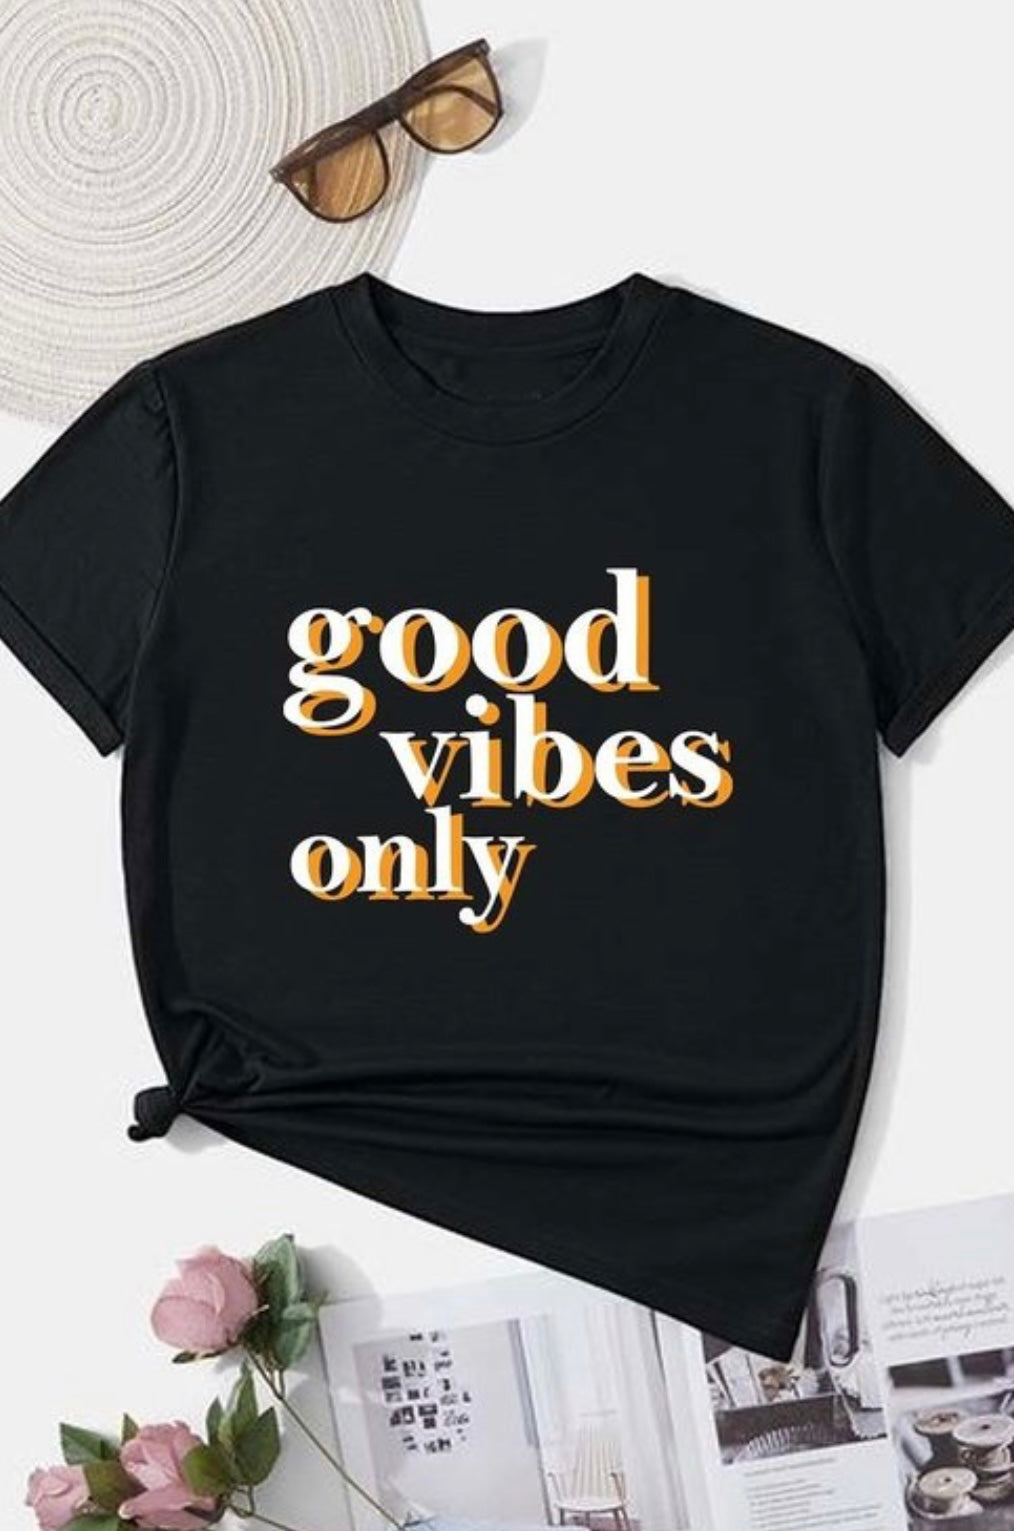 Good vibes only  Tshirt